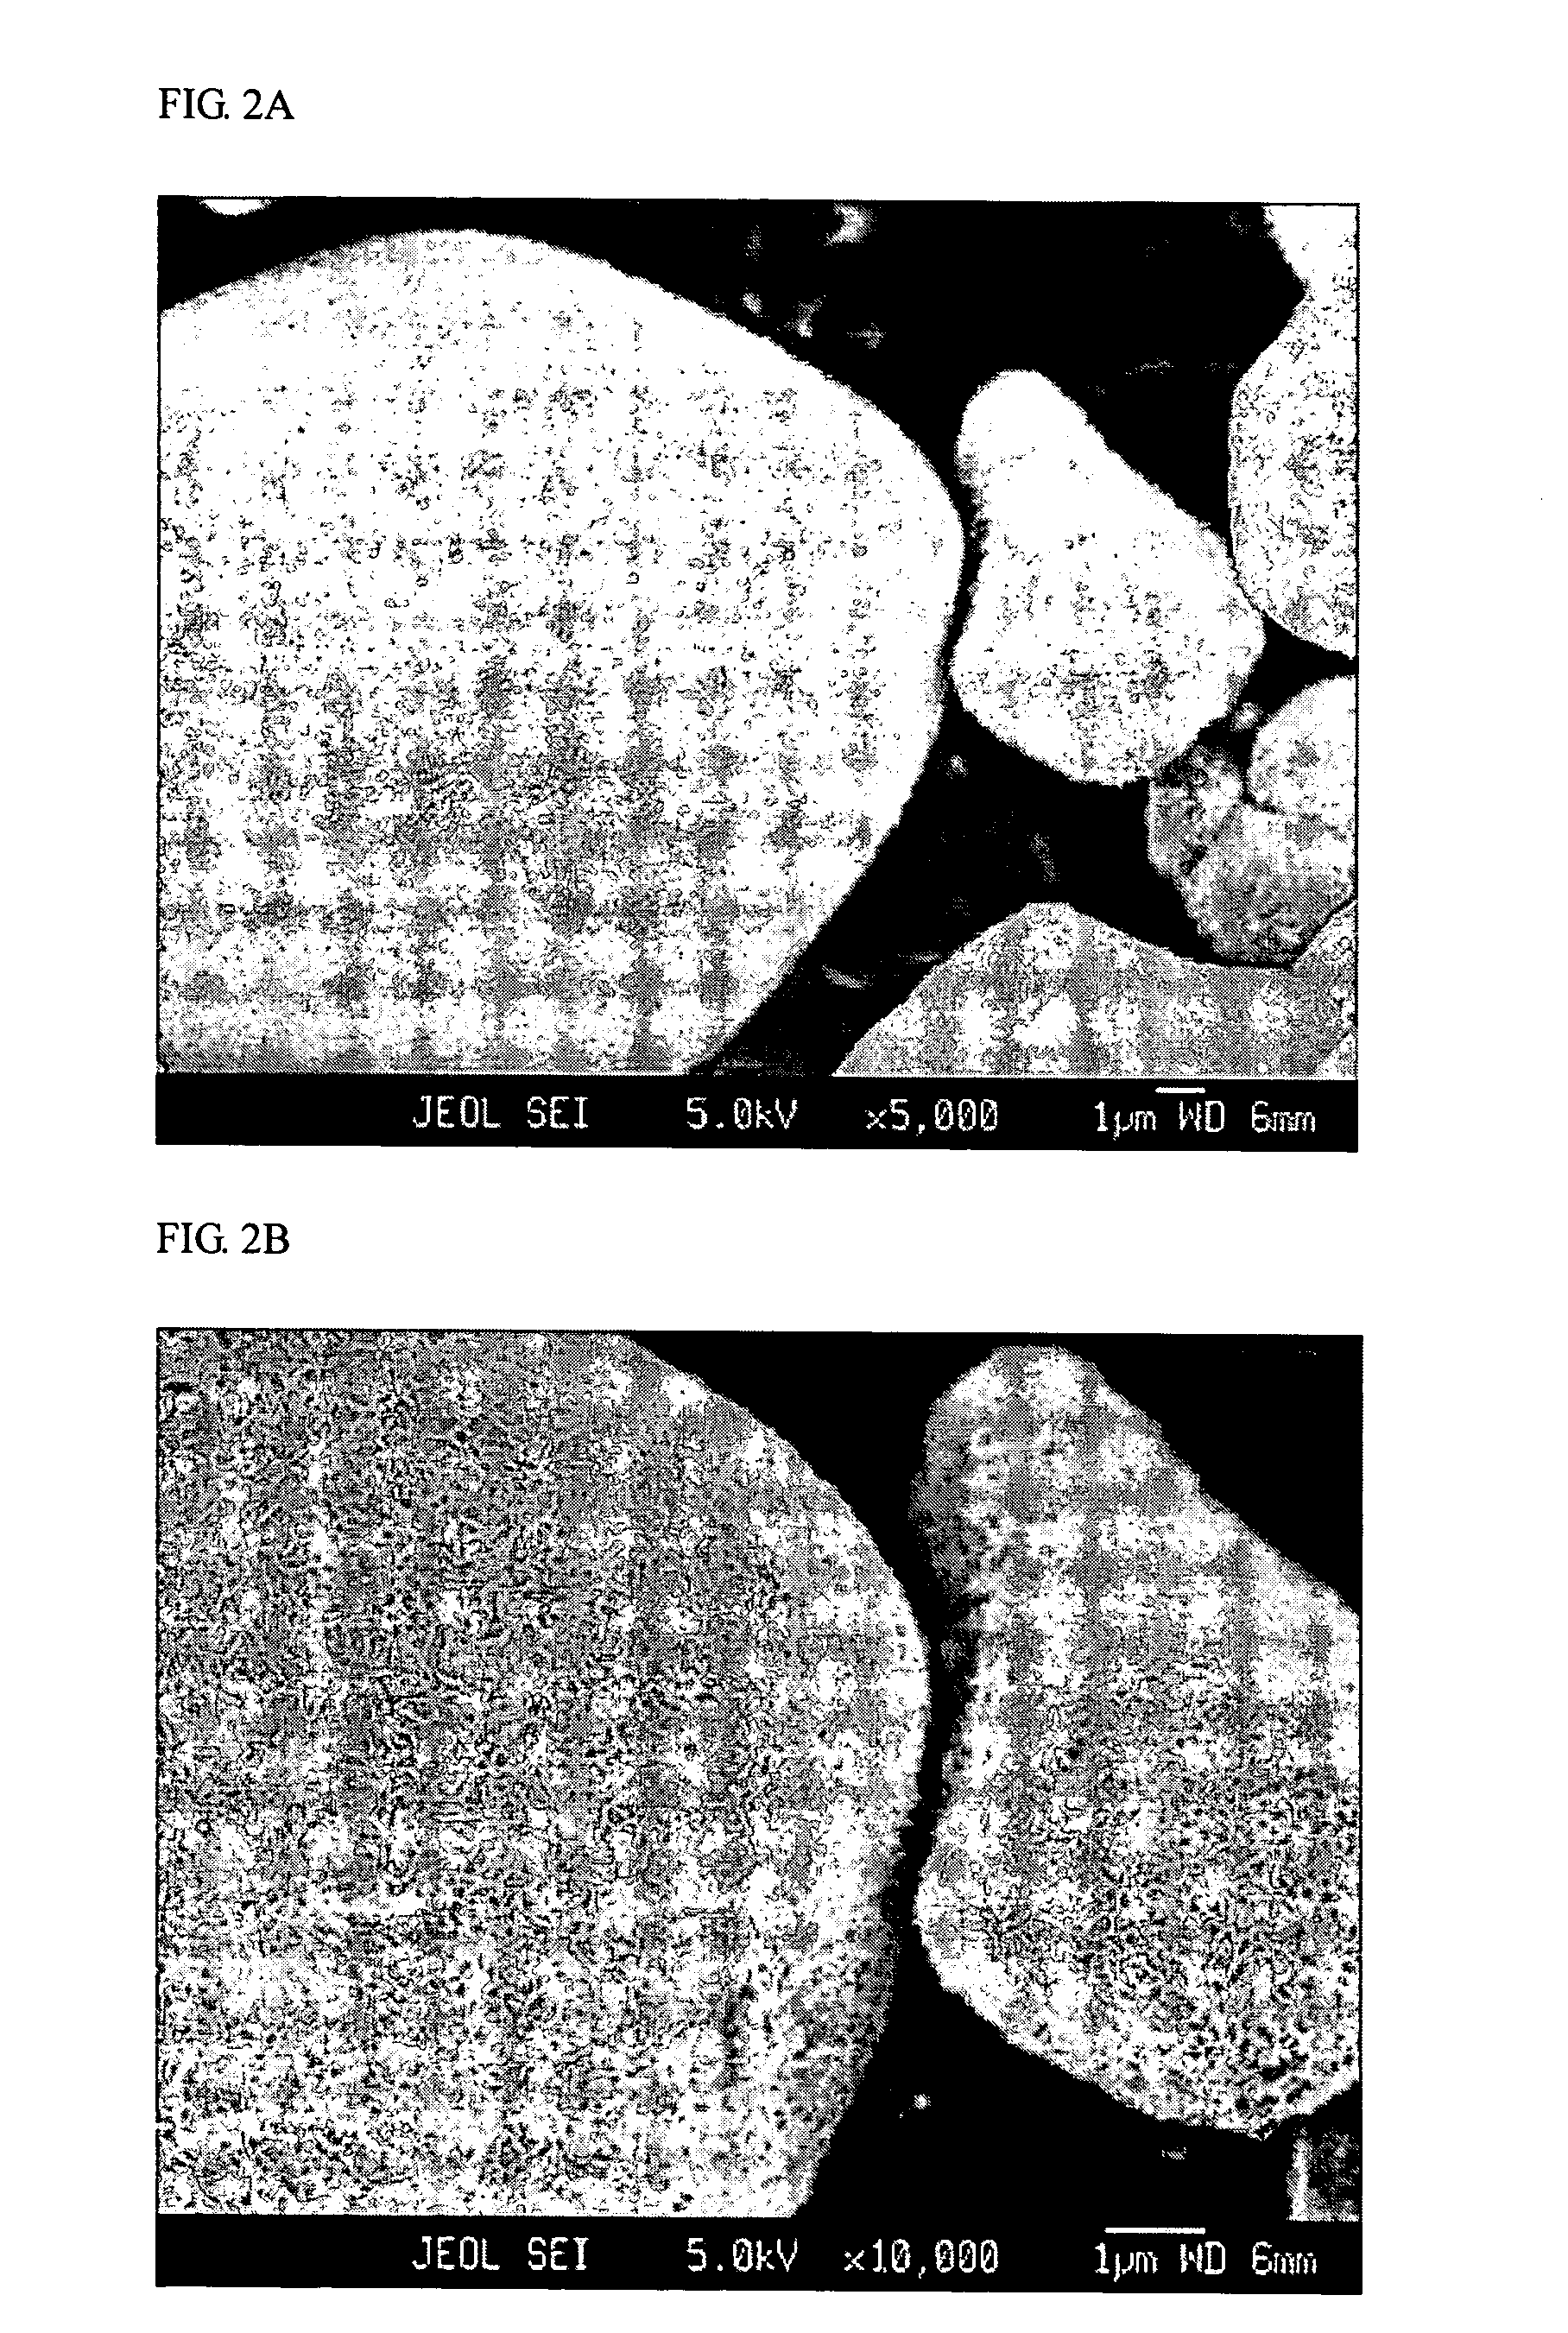 Composite precursor for aluminum-containing lithium transition metal oxide and process for preparation of the same